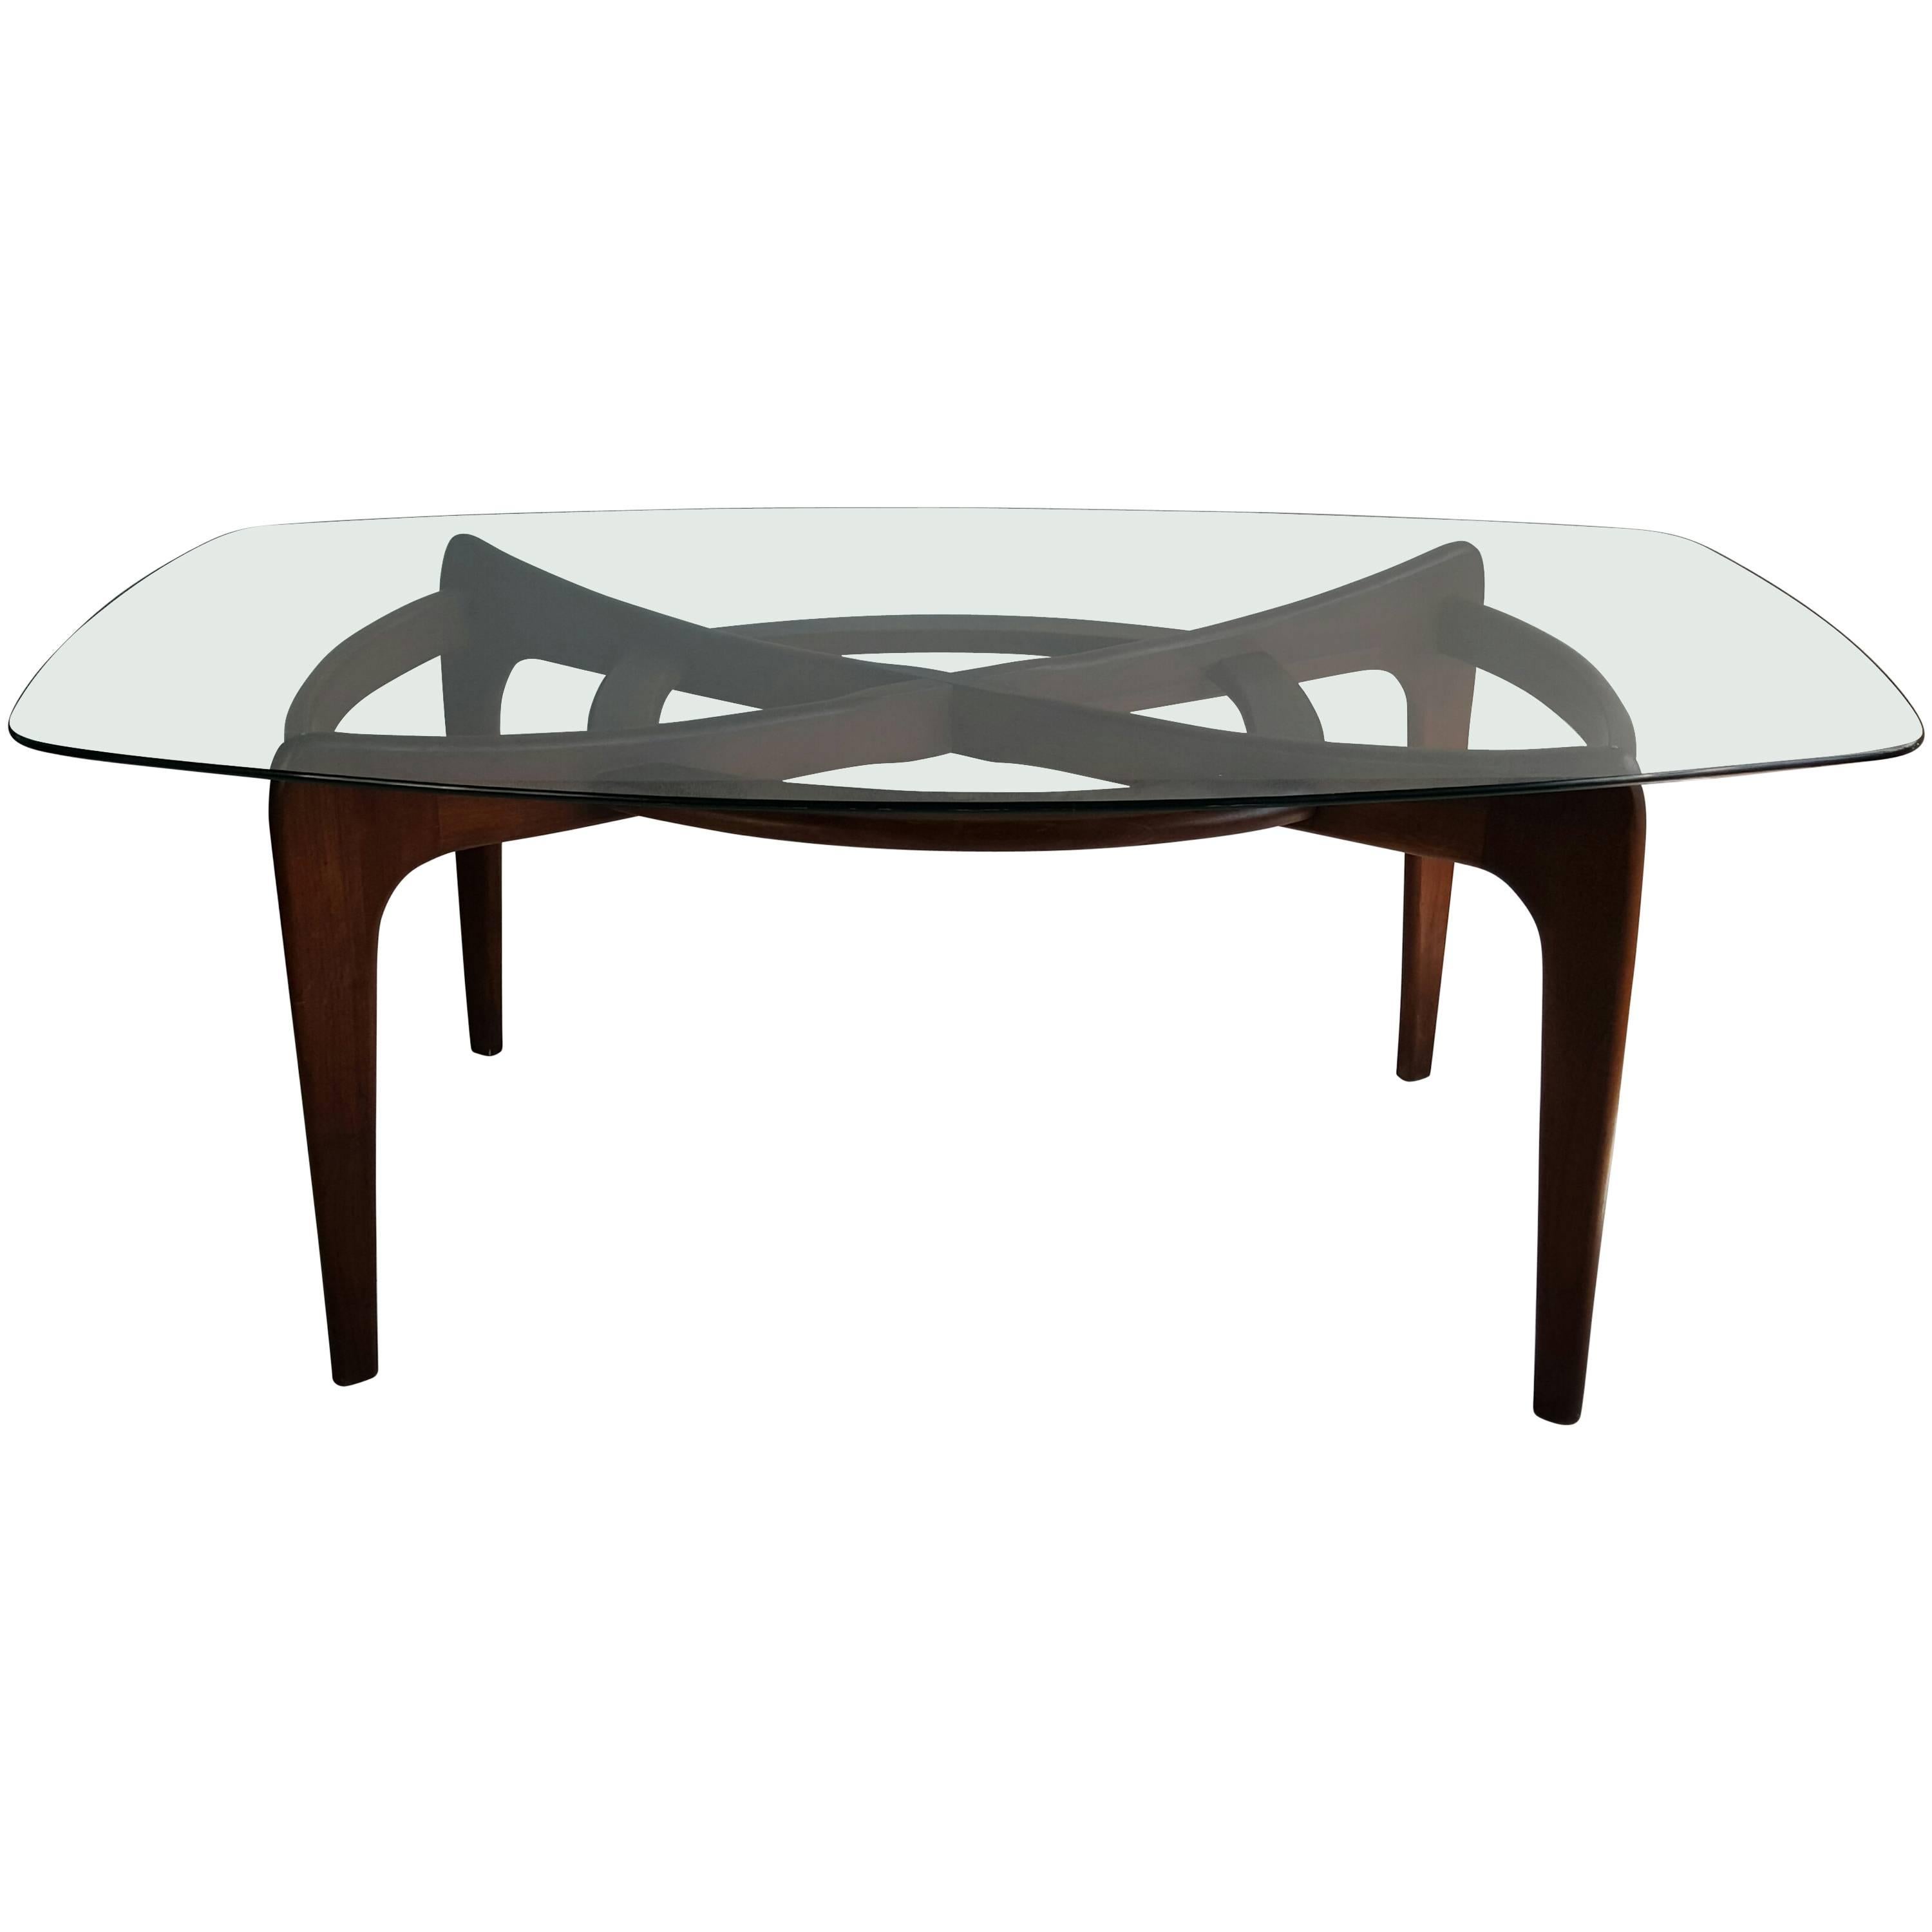 Classic Modernist Adrian Pearsall Walnut and Glass Sculptural Dining Table